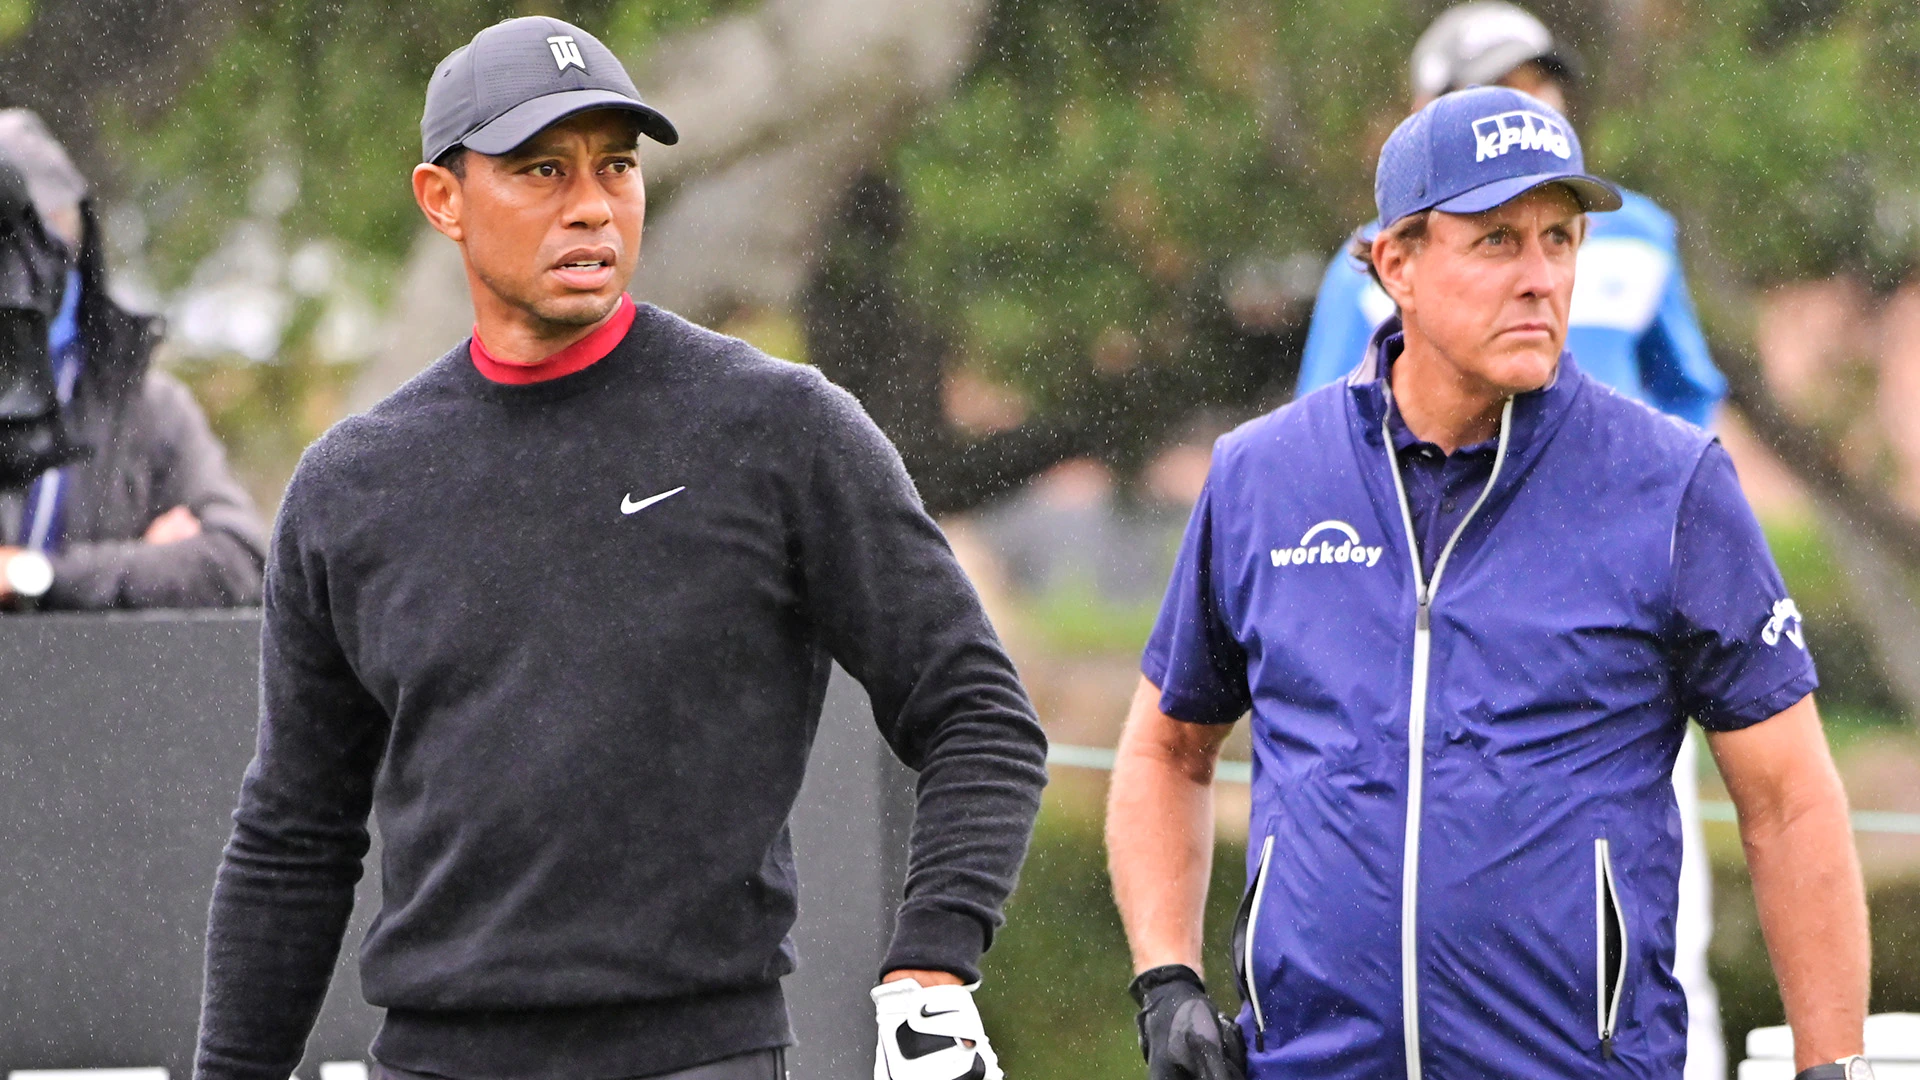 Tiger Woods and Phil Mickelson register for the 122nd U.S. Open